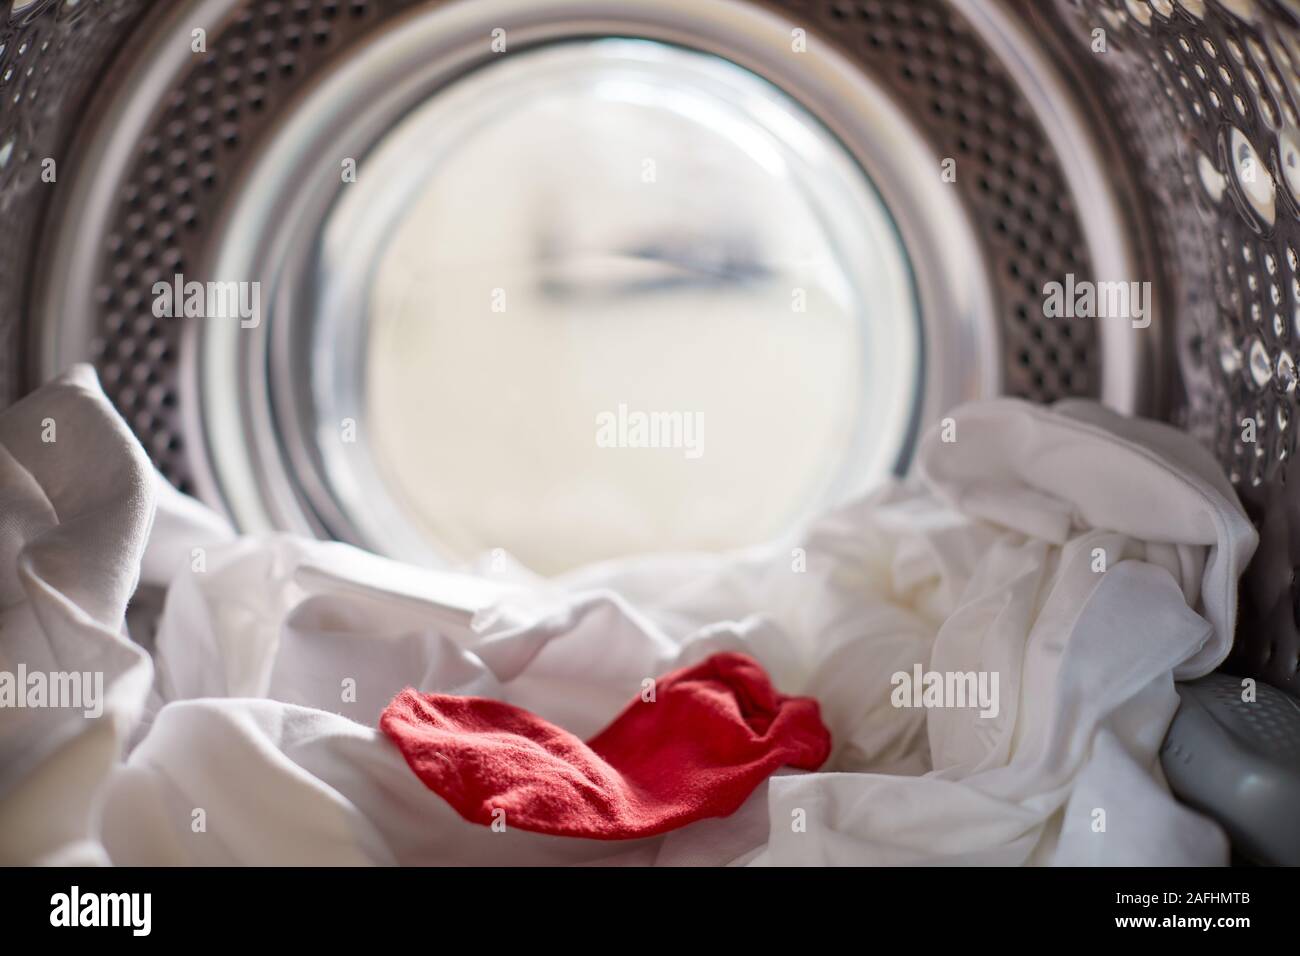 View Looking Out From Inside Washing Machine With Red Sock Mixed With White Laundry Stock Photo